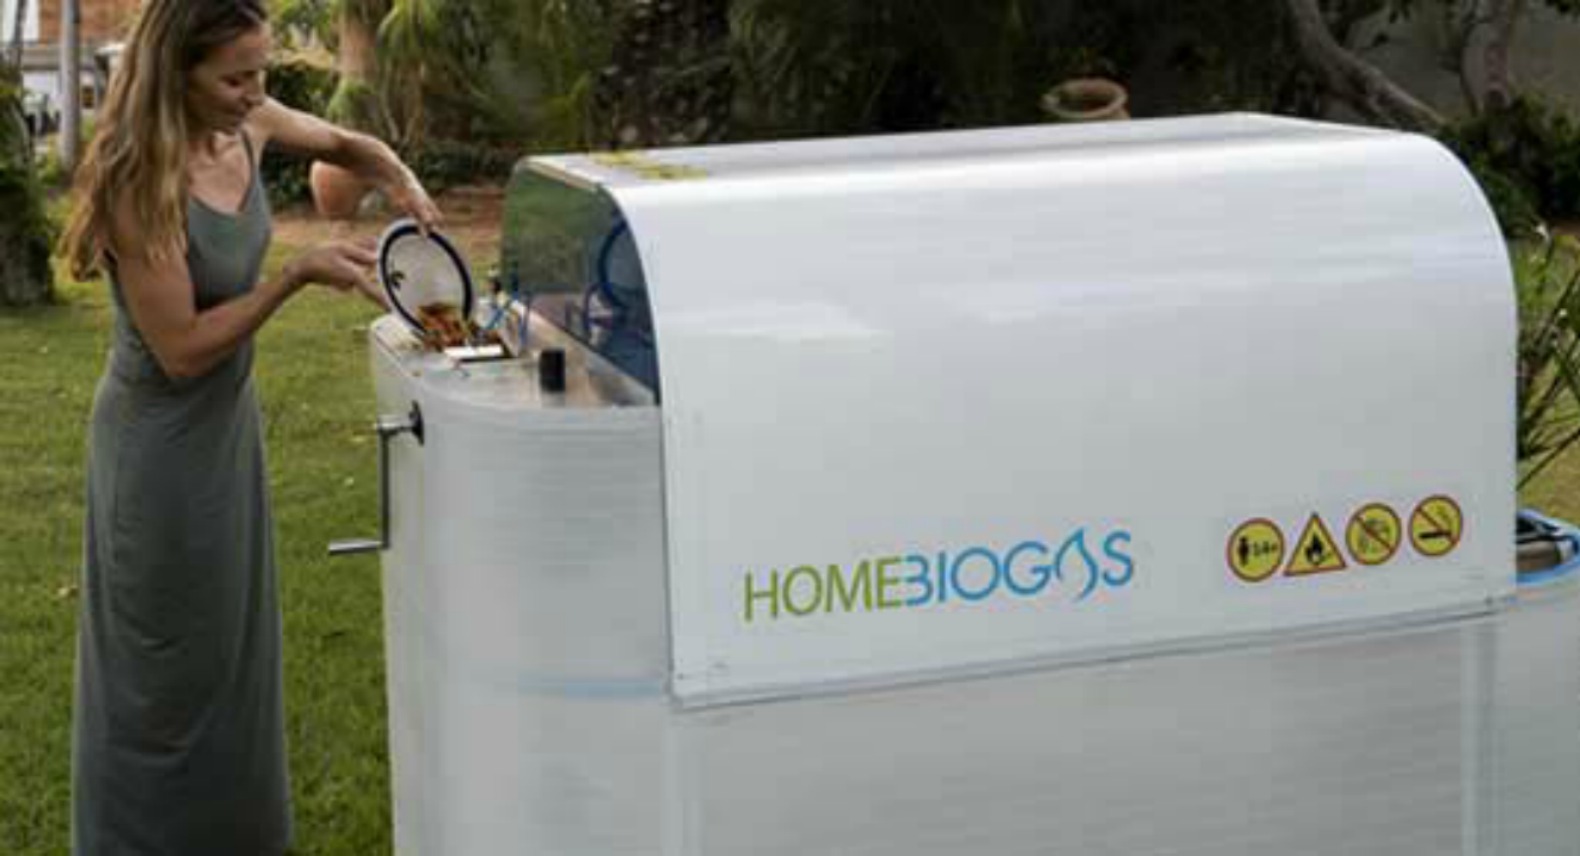 HomeBiogas Unit Turns Your Household Food Scraps Into Fuel and Fertilizer